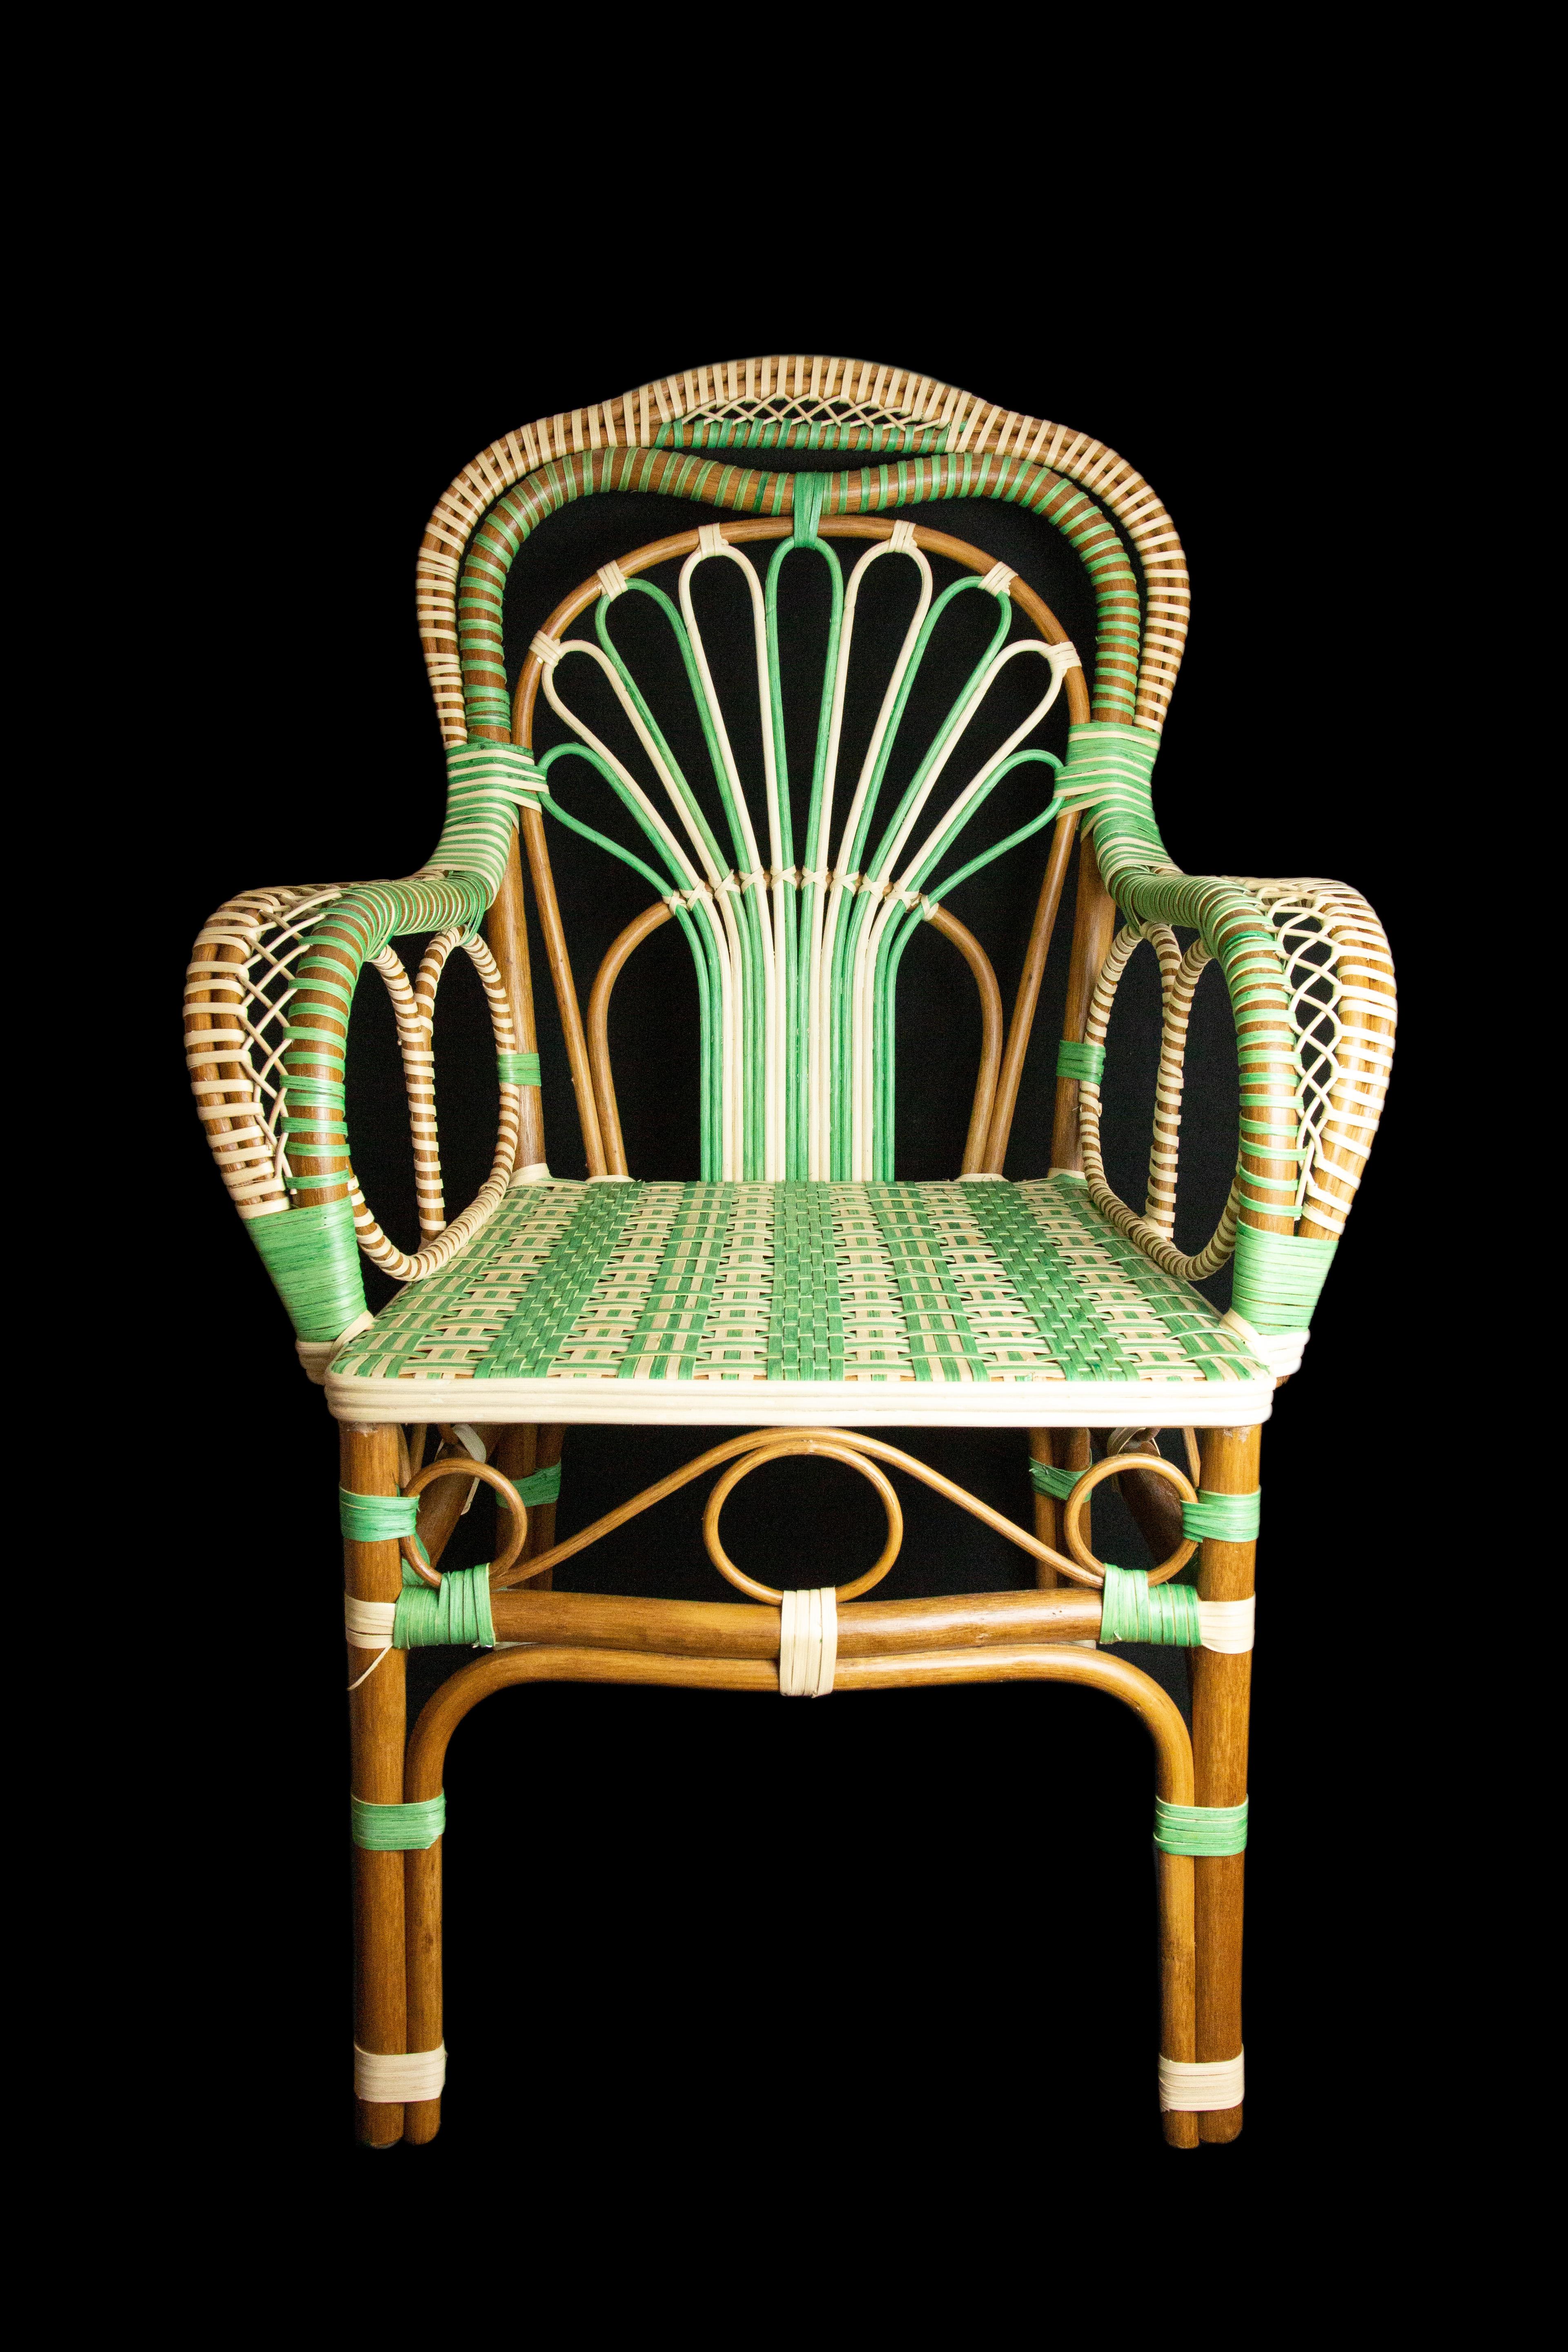 Peacock Rattan Arm Chair. Made exclusively for Creel and Gow in Tangier Morocco.

Measures: 18